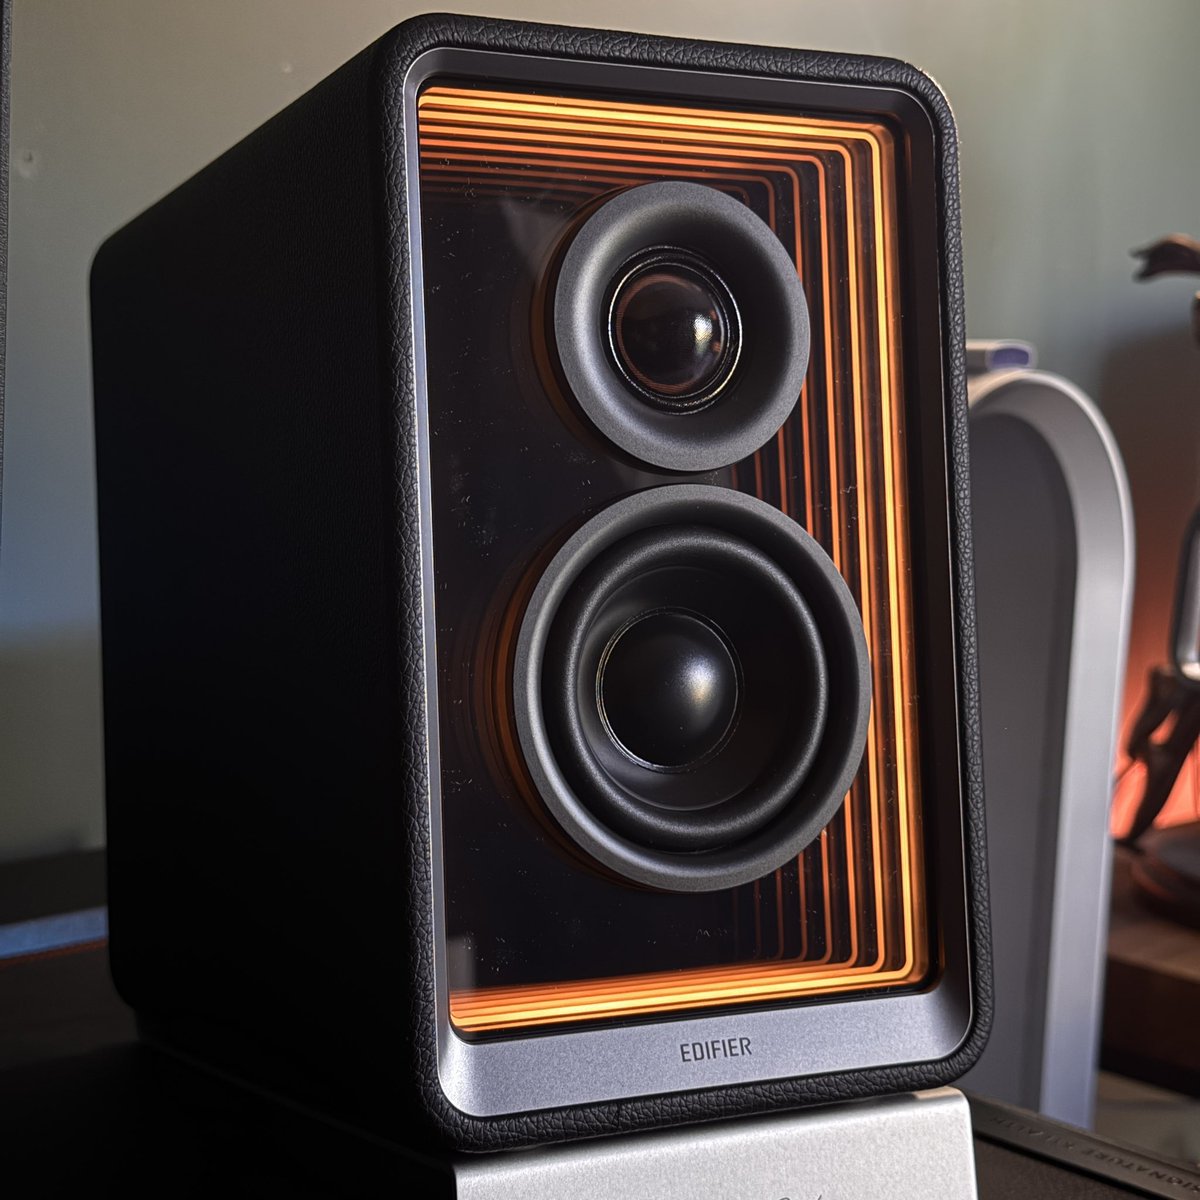 These are some of the coolest looking desktop speakers I’ve ever seen… 👀 Review coming soon - ft @Edifier_Global